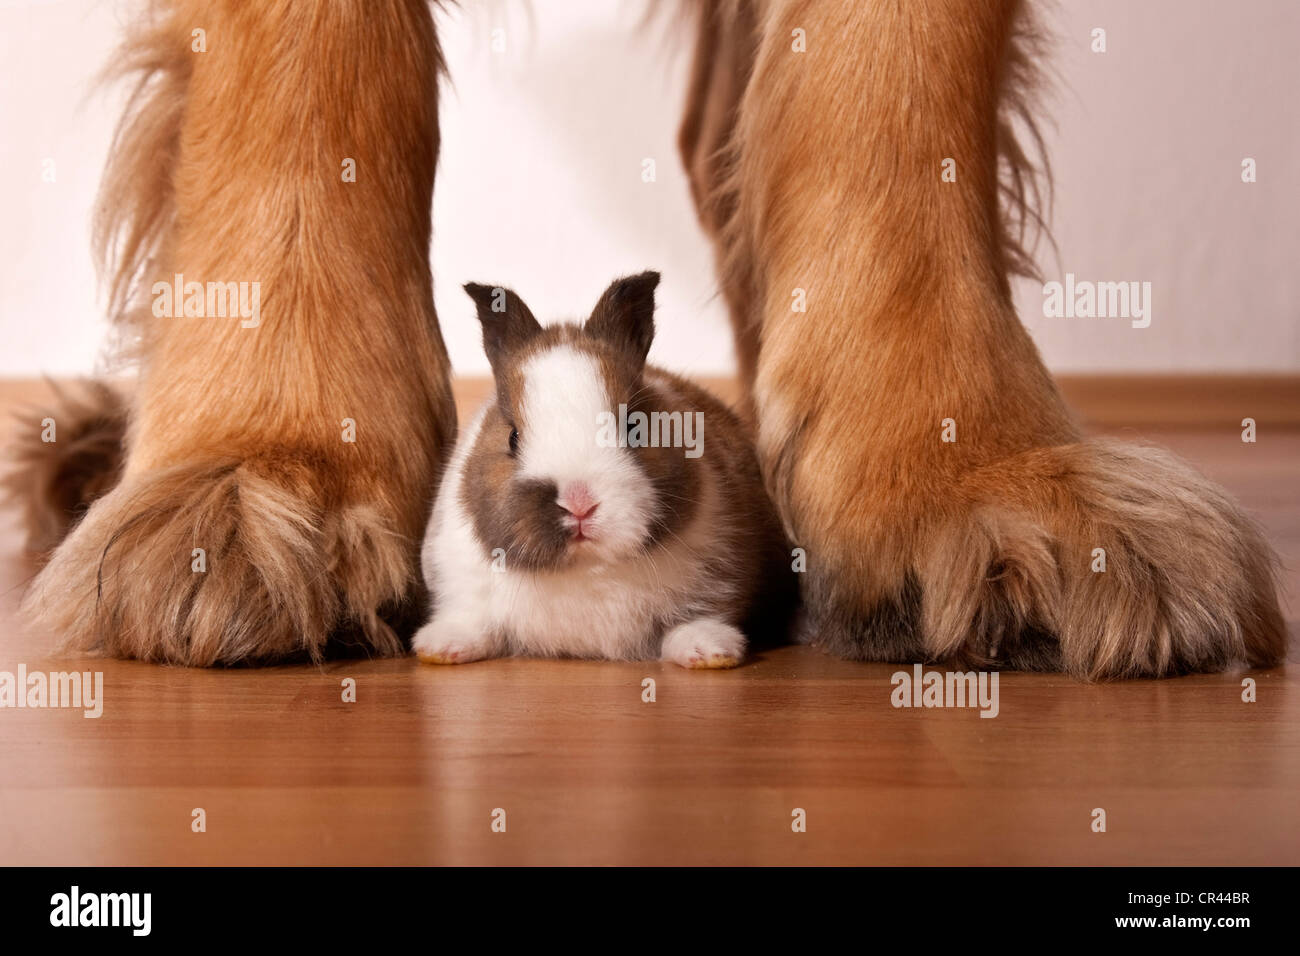 Dwarf rabbit sitting between the legs of a large Leonberger dog Stock Photo